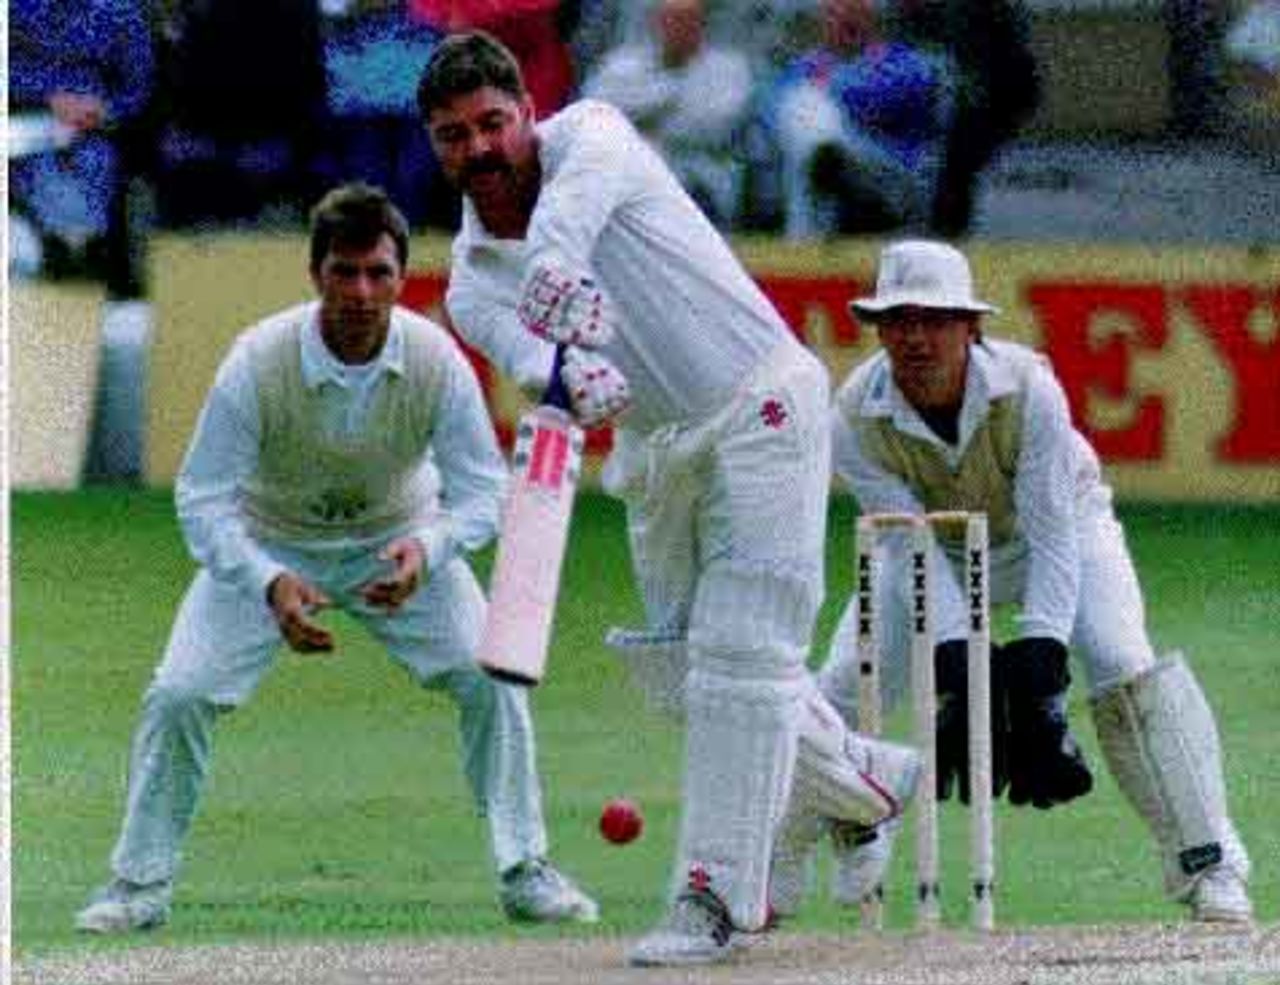 Colin Metson keeping wicket at Neath against the 1993 Australians.